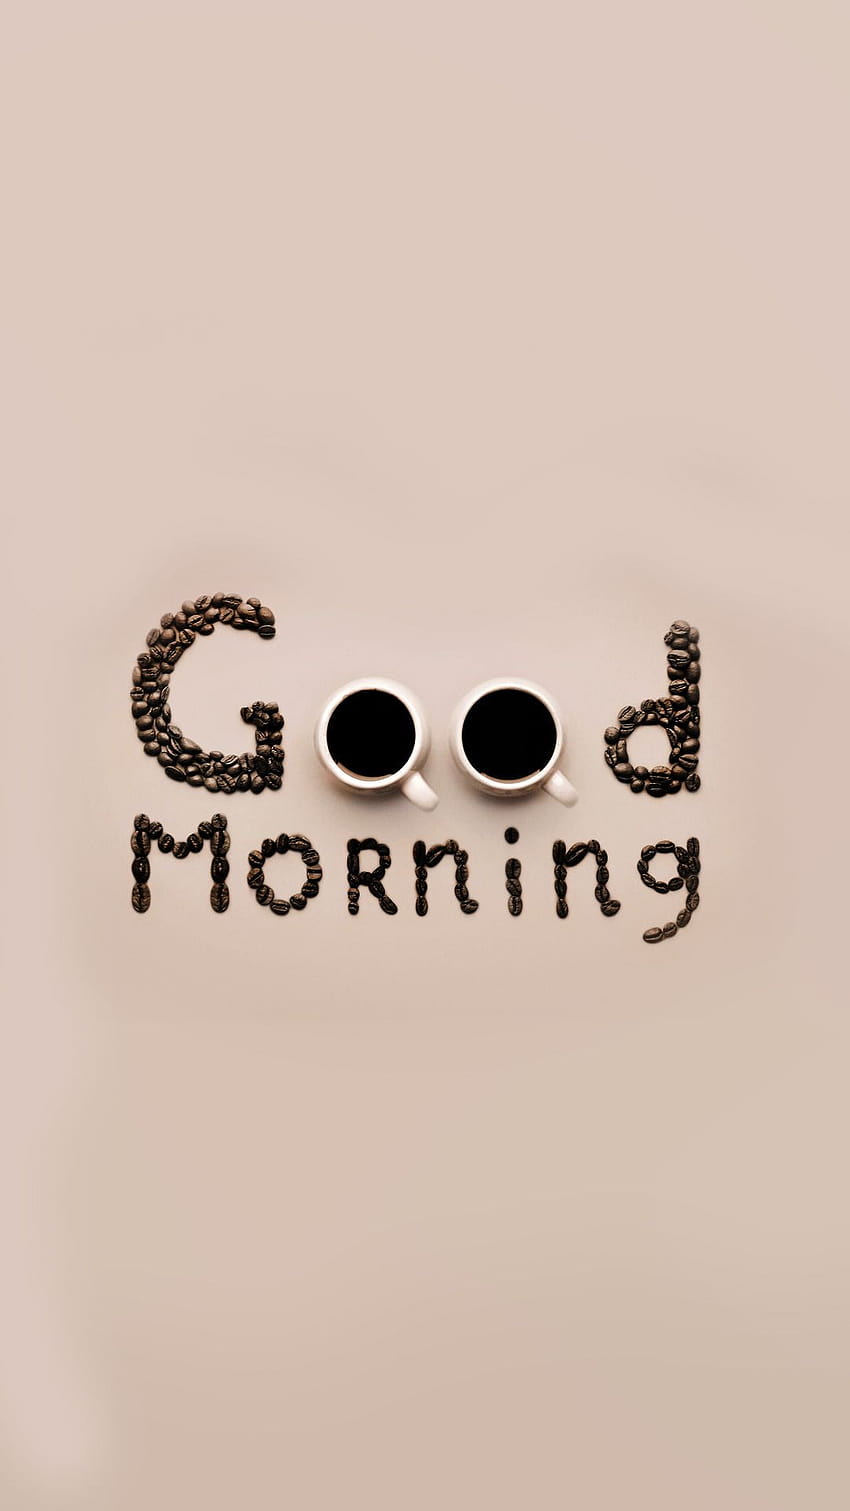 60 Typography iPhone For, good morning iphone HD phone wallpaper